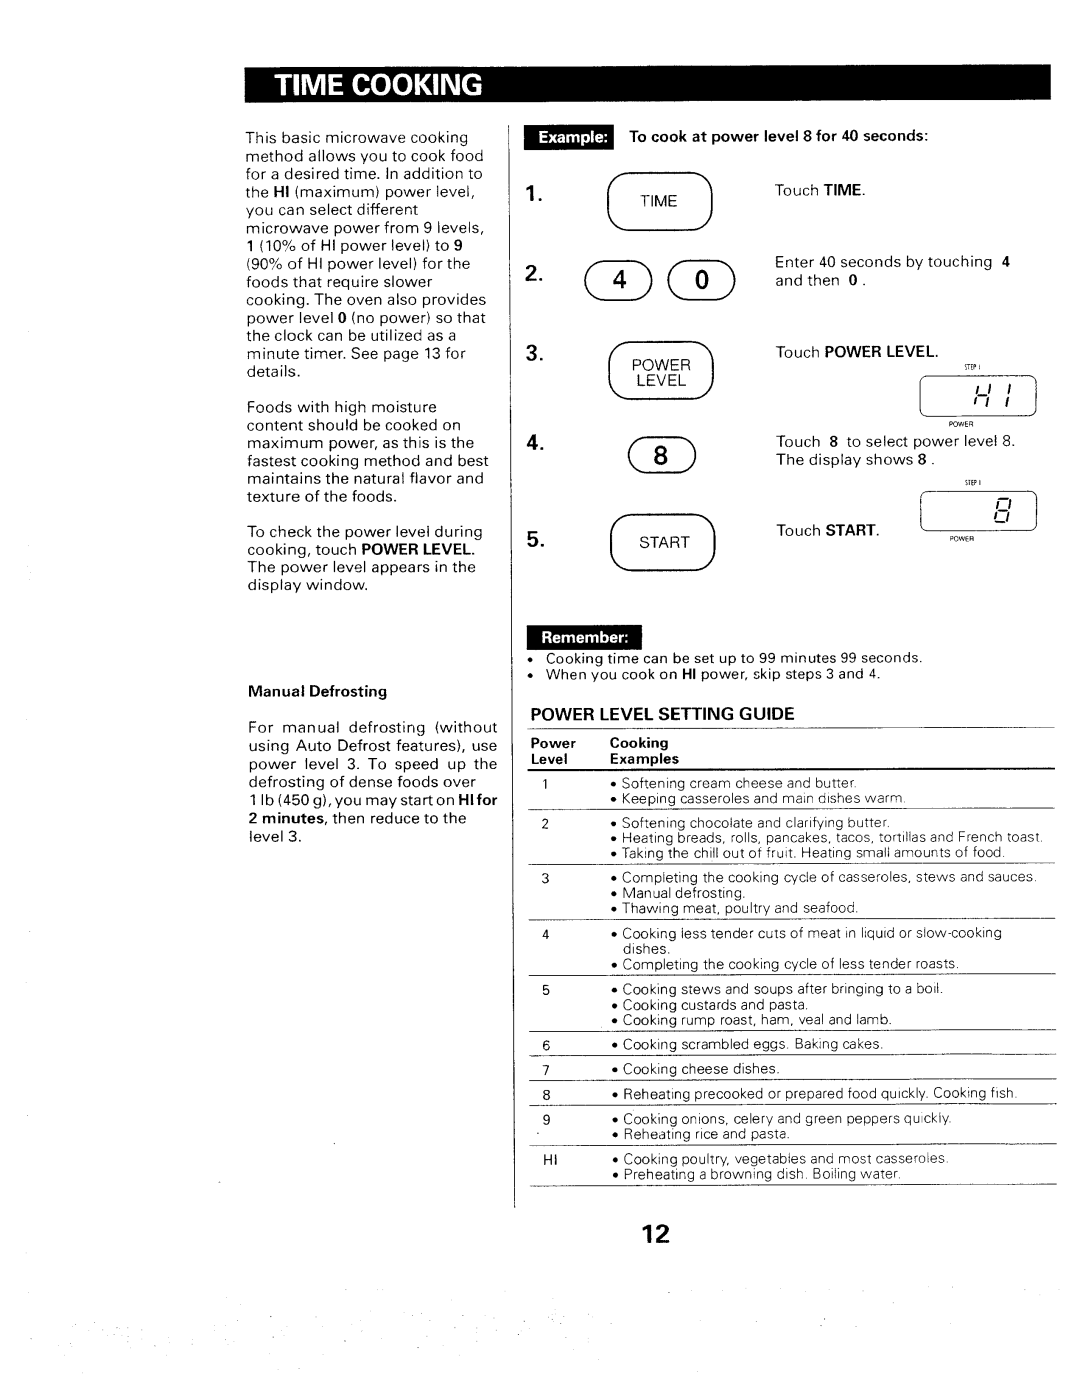 Sears 565. 66480 owner manual Power Level Setting Guide, To cook at power level 8 for 40 seconds, Manual Defrosting 